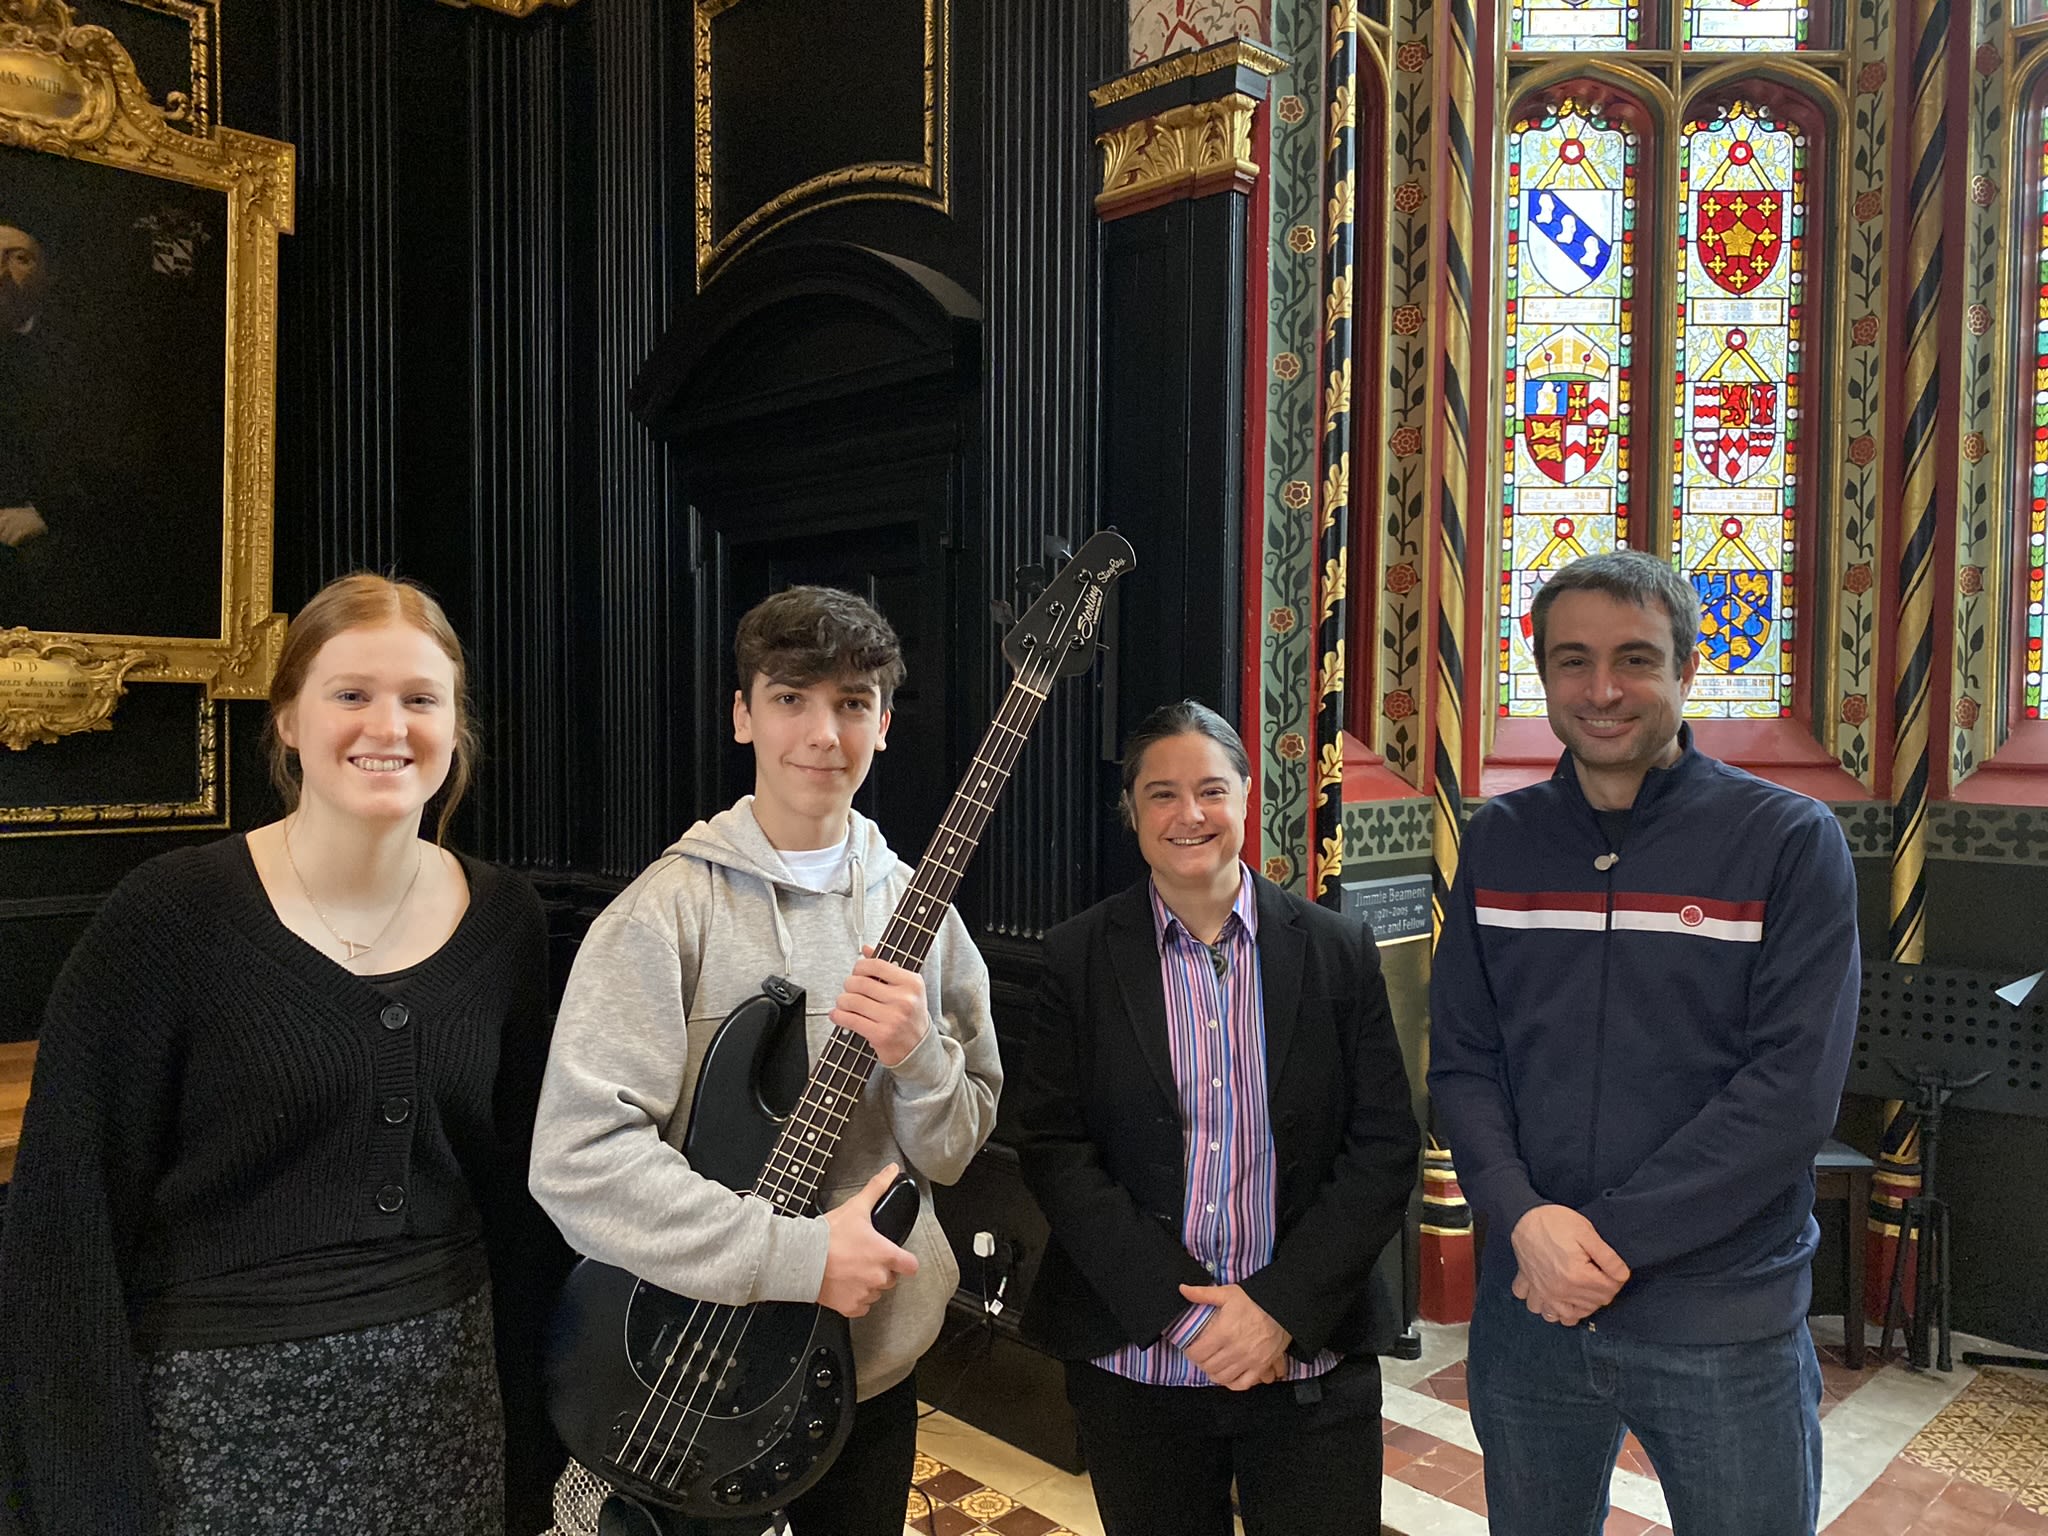 Four people lined up in Old Hall for a photo, one holding an electric bass guitar